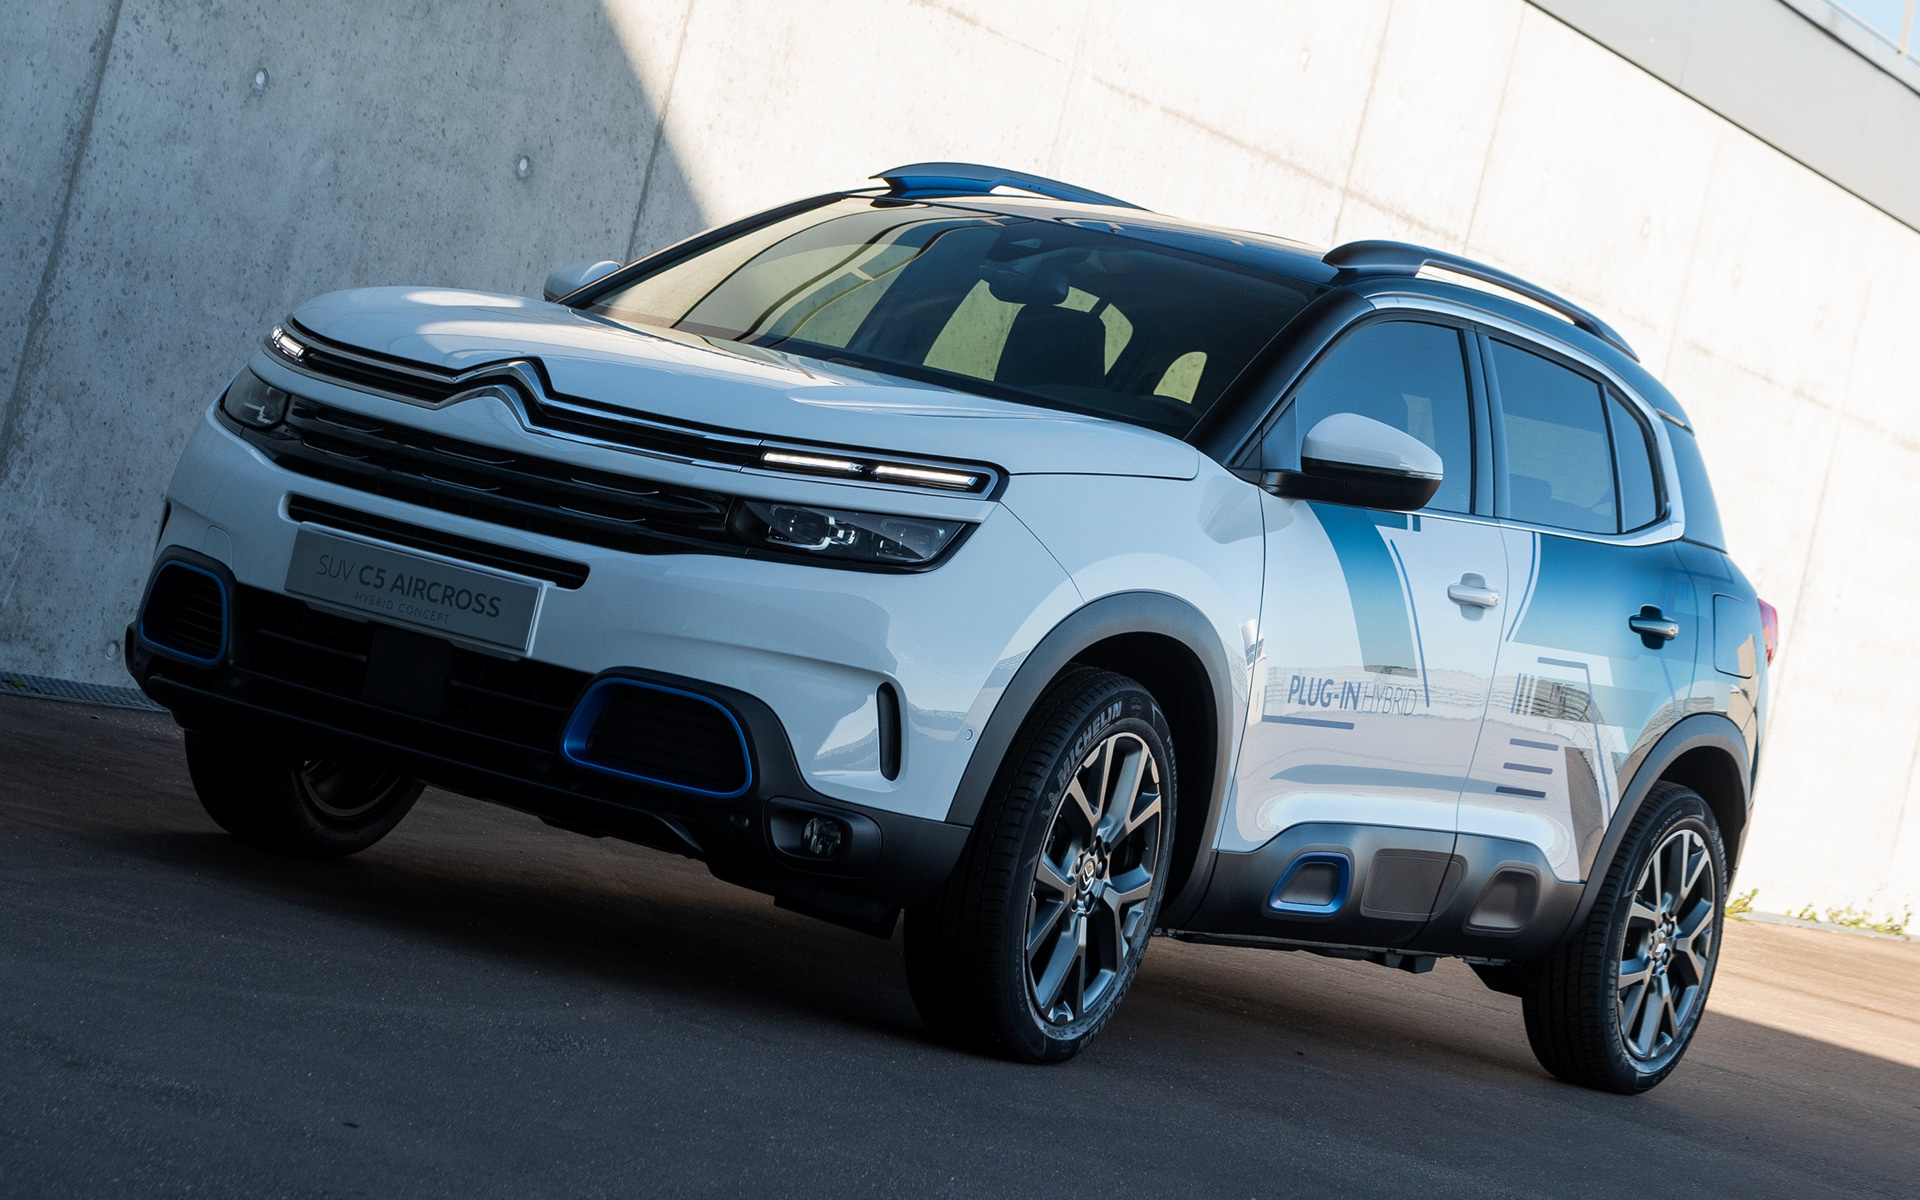 2018 Citroen C5 Aircross SUV Hybrid Concept - Wallpapers and HD Images | Car Pixel1920 x 1200